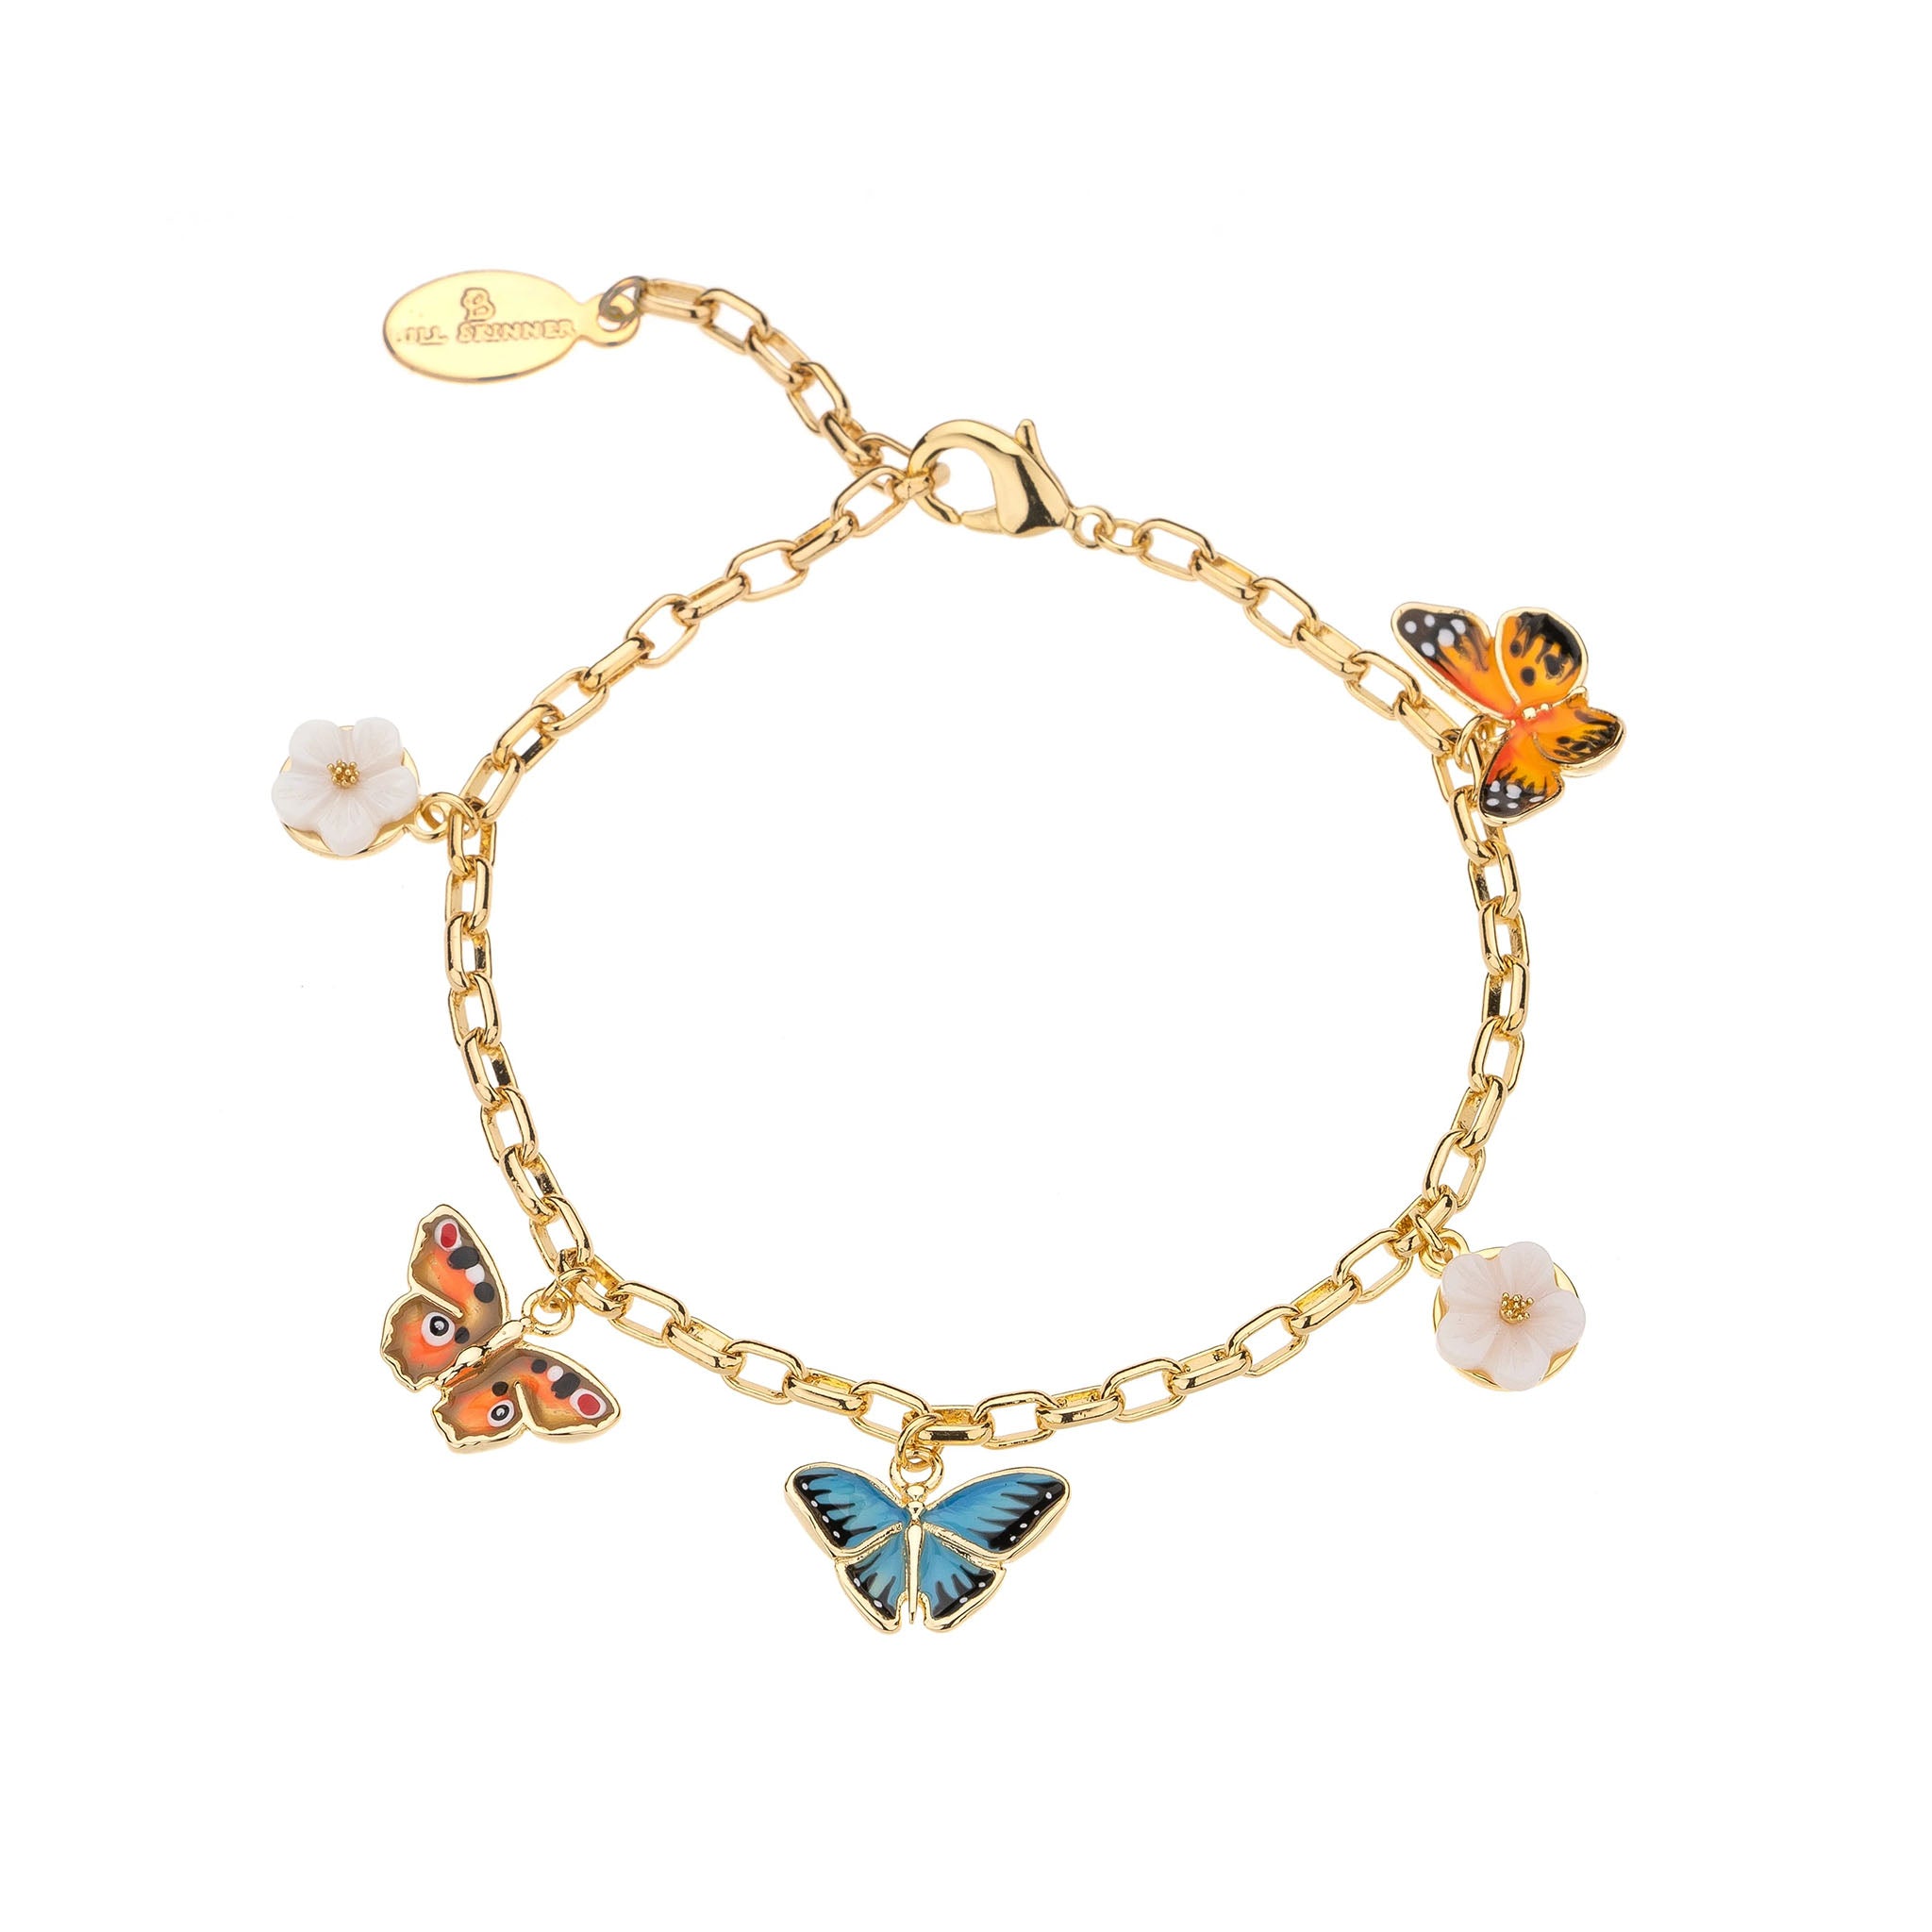 9CT ROSE GOLD CHARM BRACELET SET WITH SILVER CHARMS, 9CT GOLD CHARMS AND 18CT  GOLD CHARMS